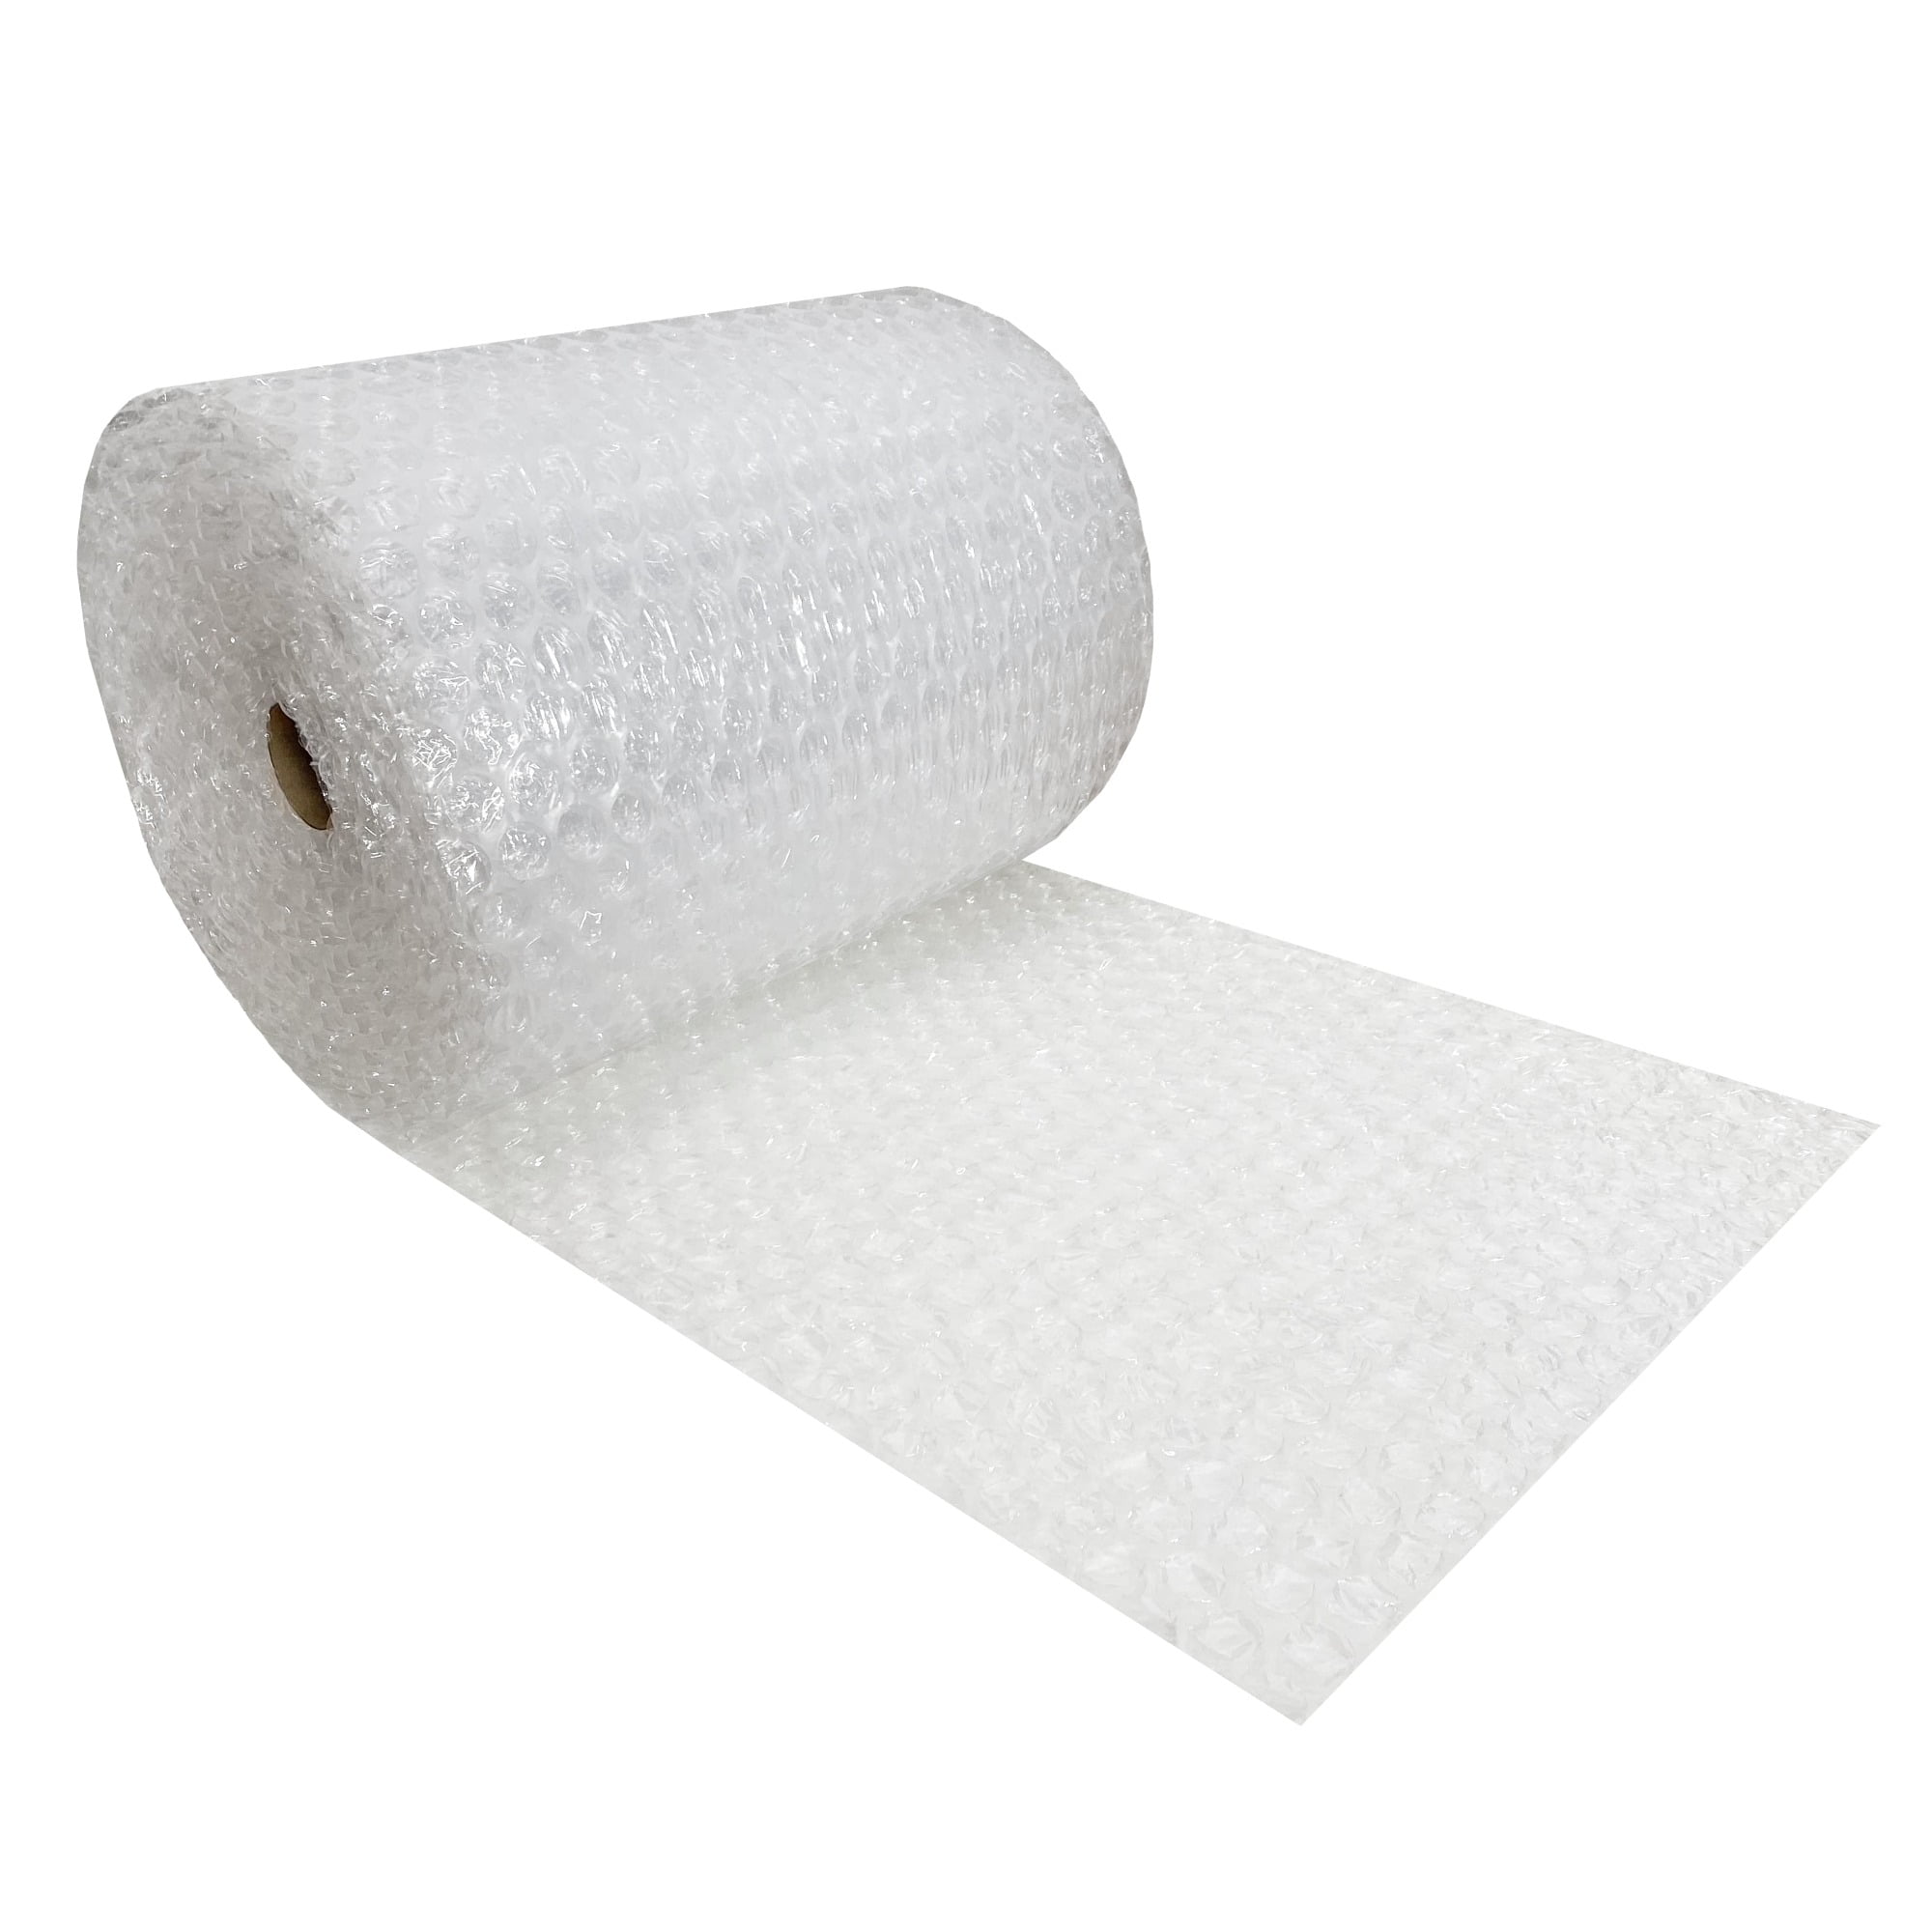 Large bubble Wrap (collection only) – Wessex Rope and Packaging